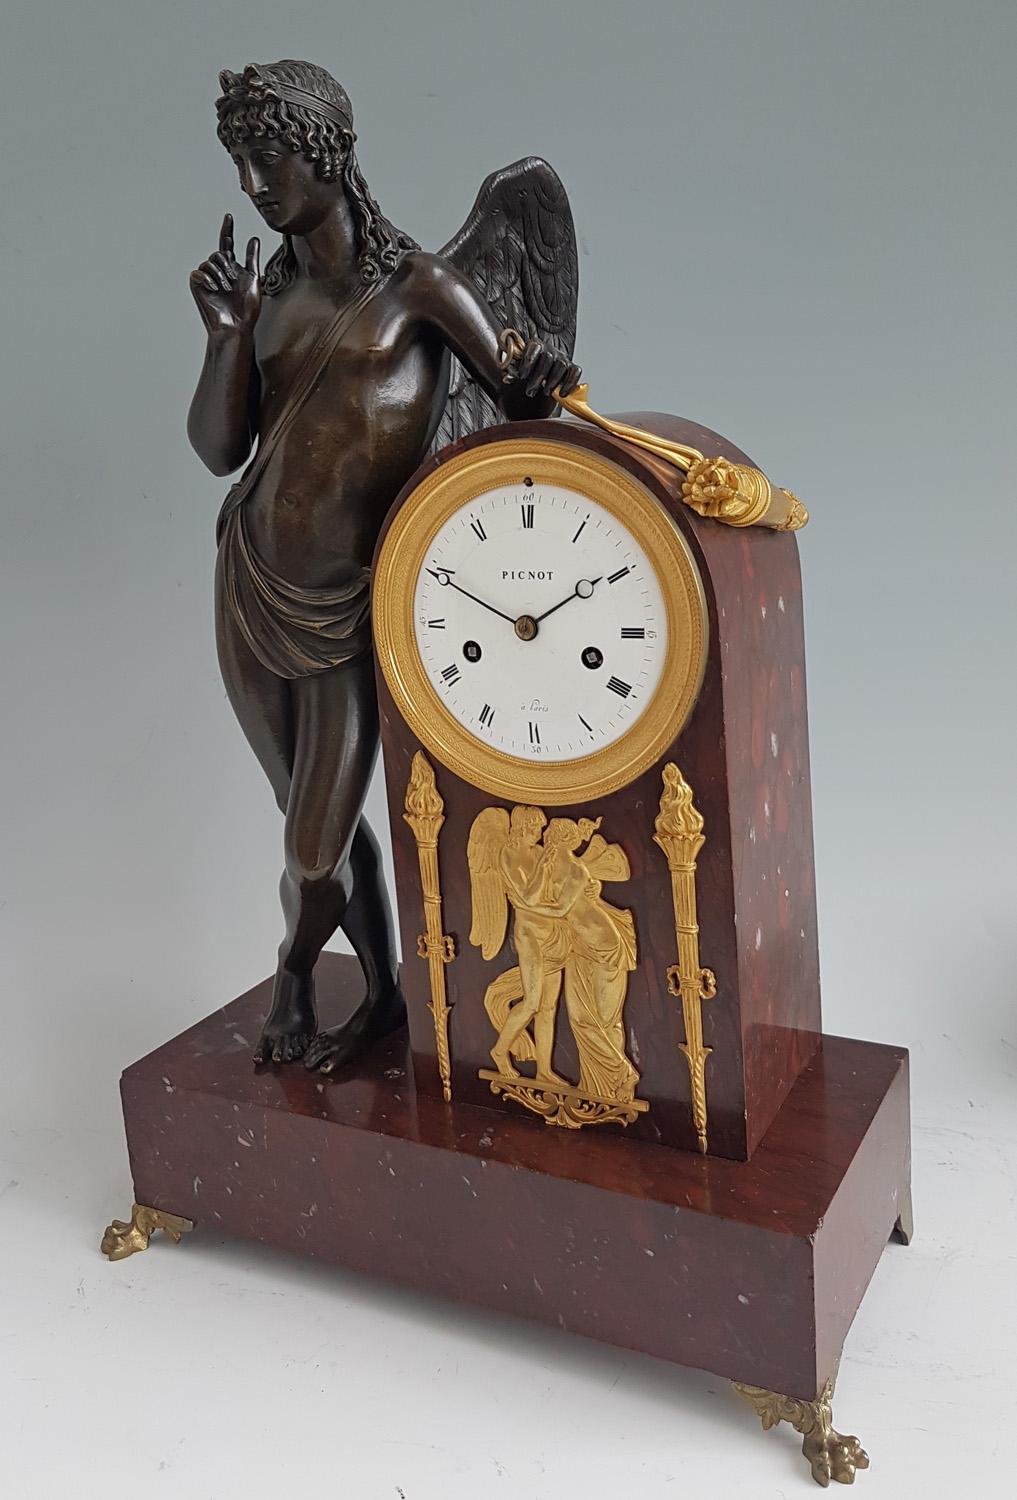 French Empire Mantel Clock in Ormolu, Patinated Bronze and Marble, Signed Picnot In Good Condition For Sale In London, GB